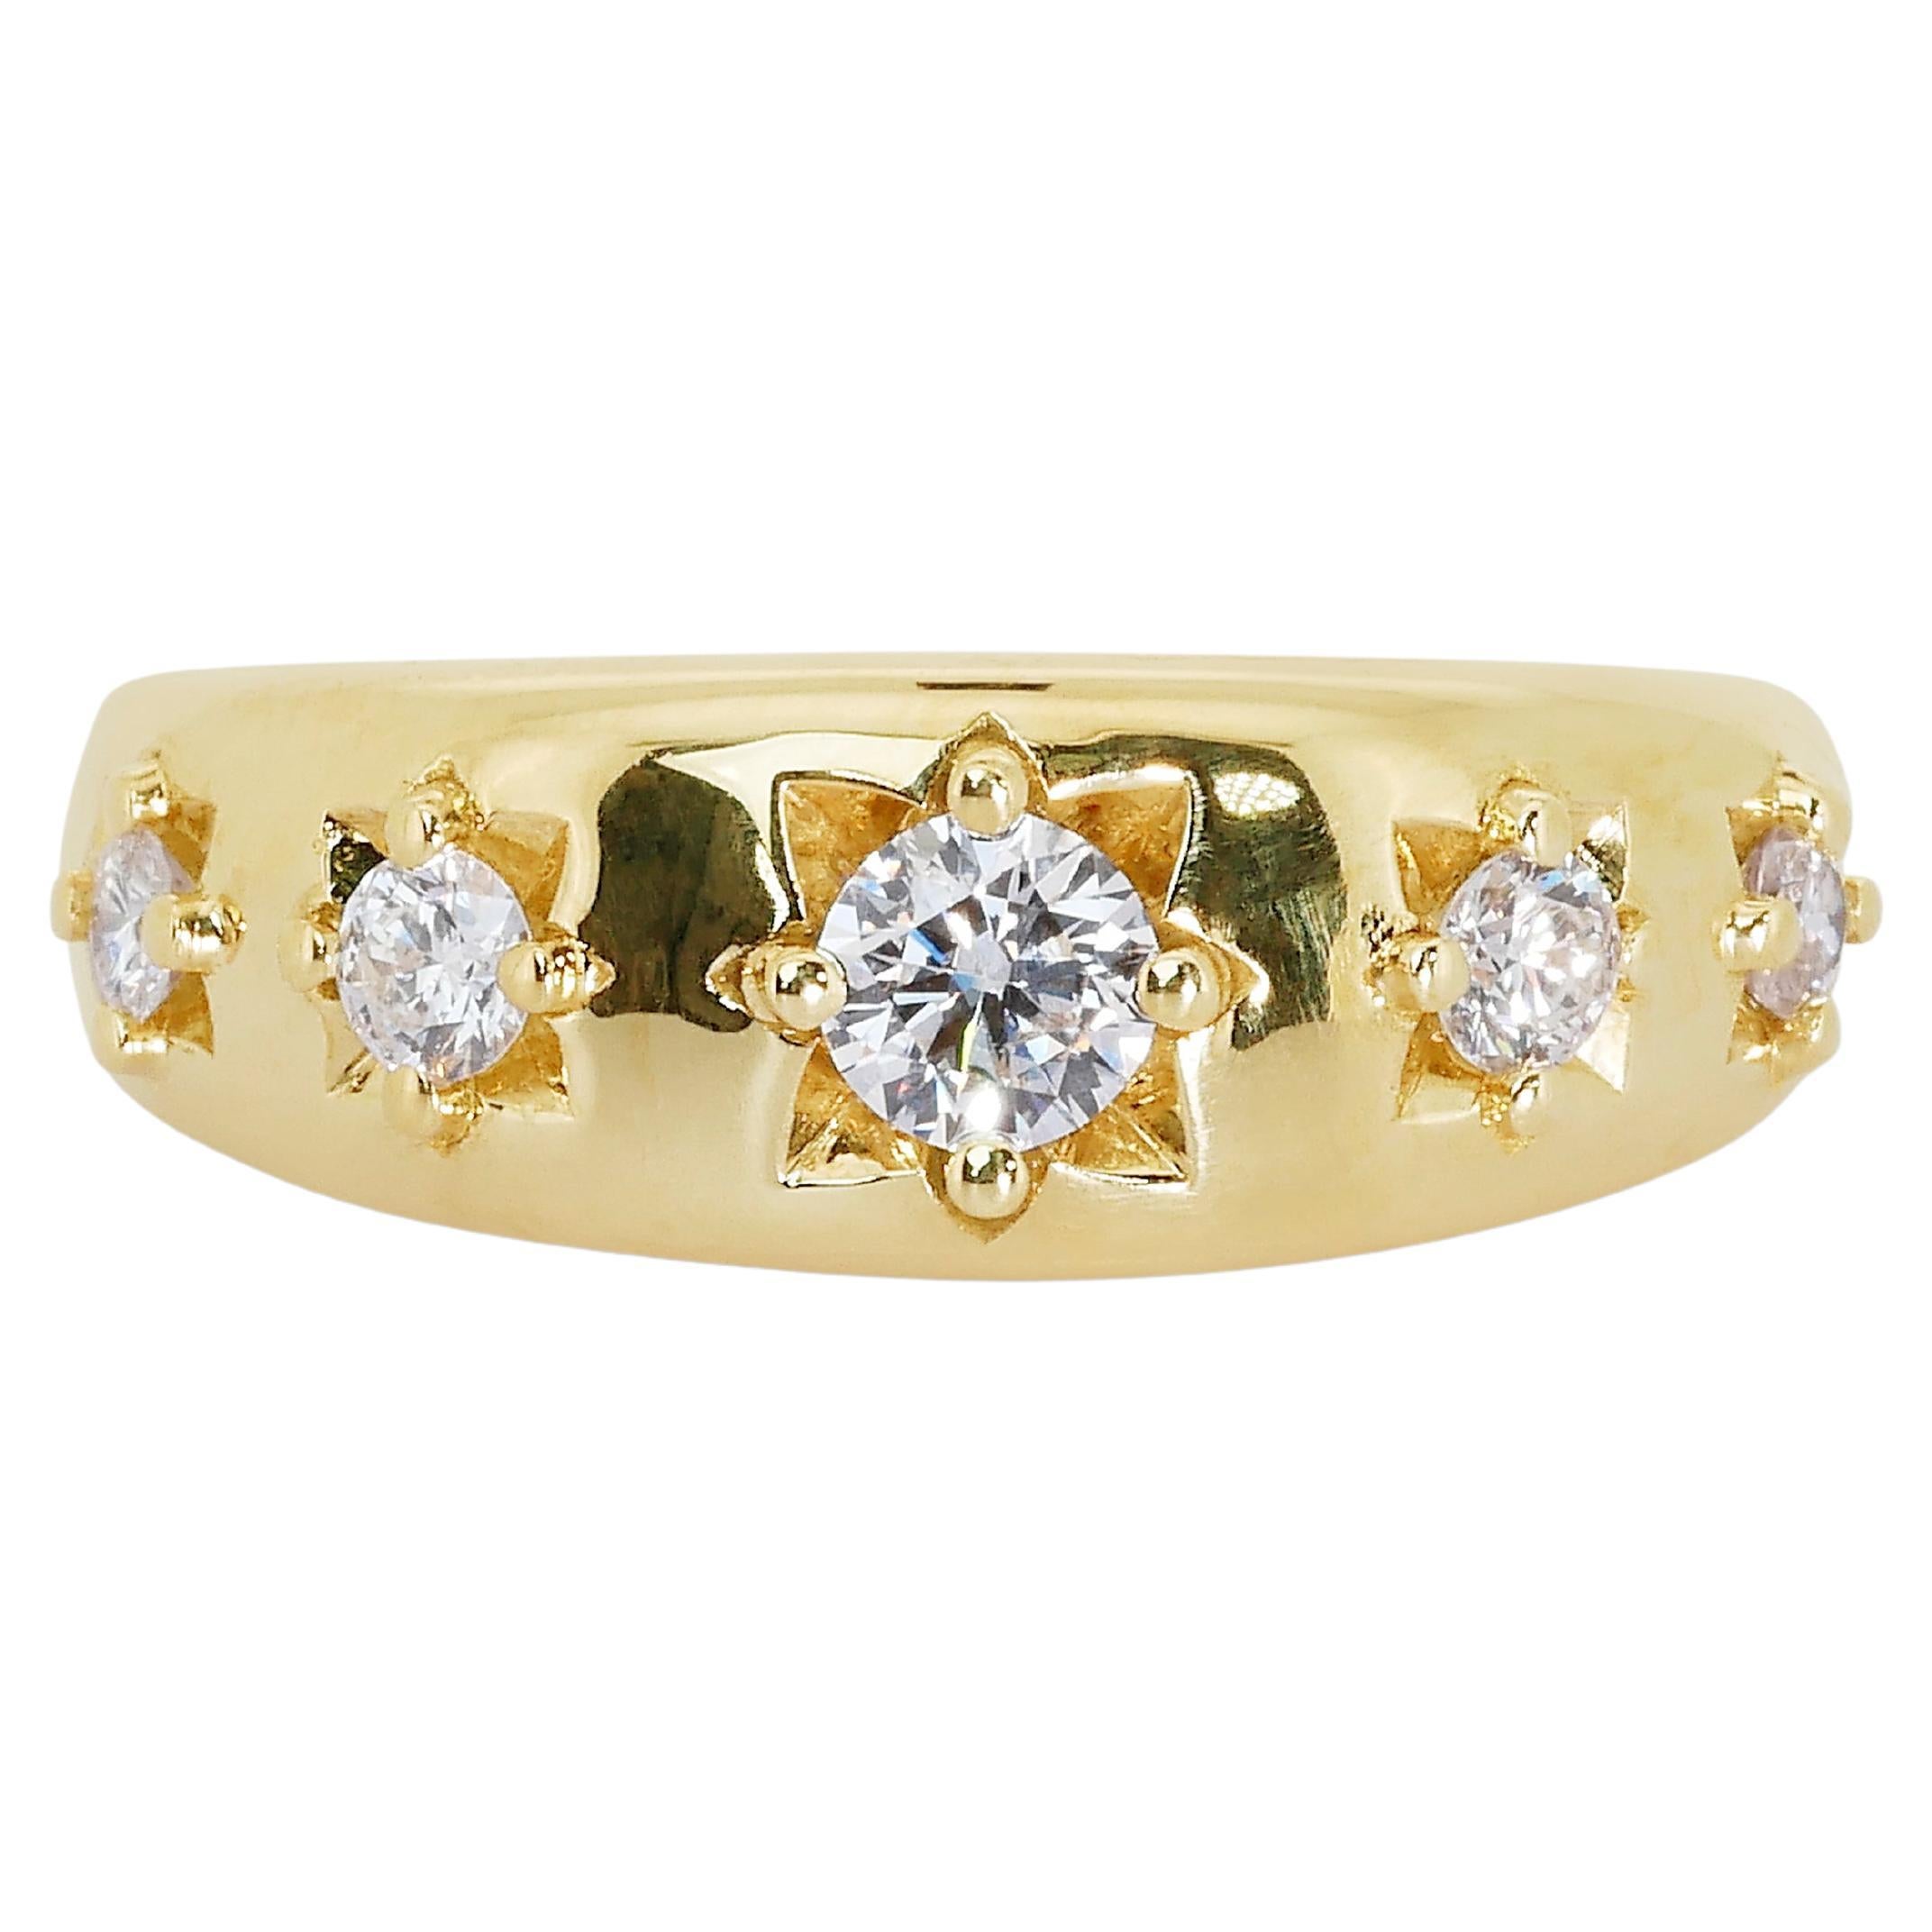 Marvelous 18k Yellow Gold Dome Ring w/ 0.55 Ct Natural Diamonds Aig Certificate For Sale